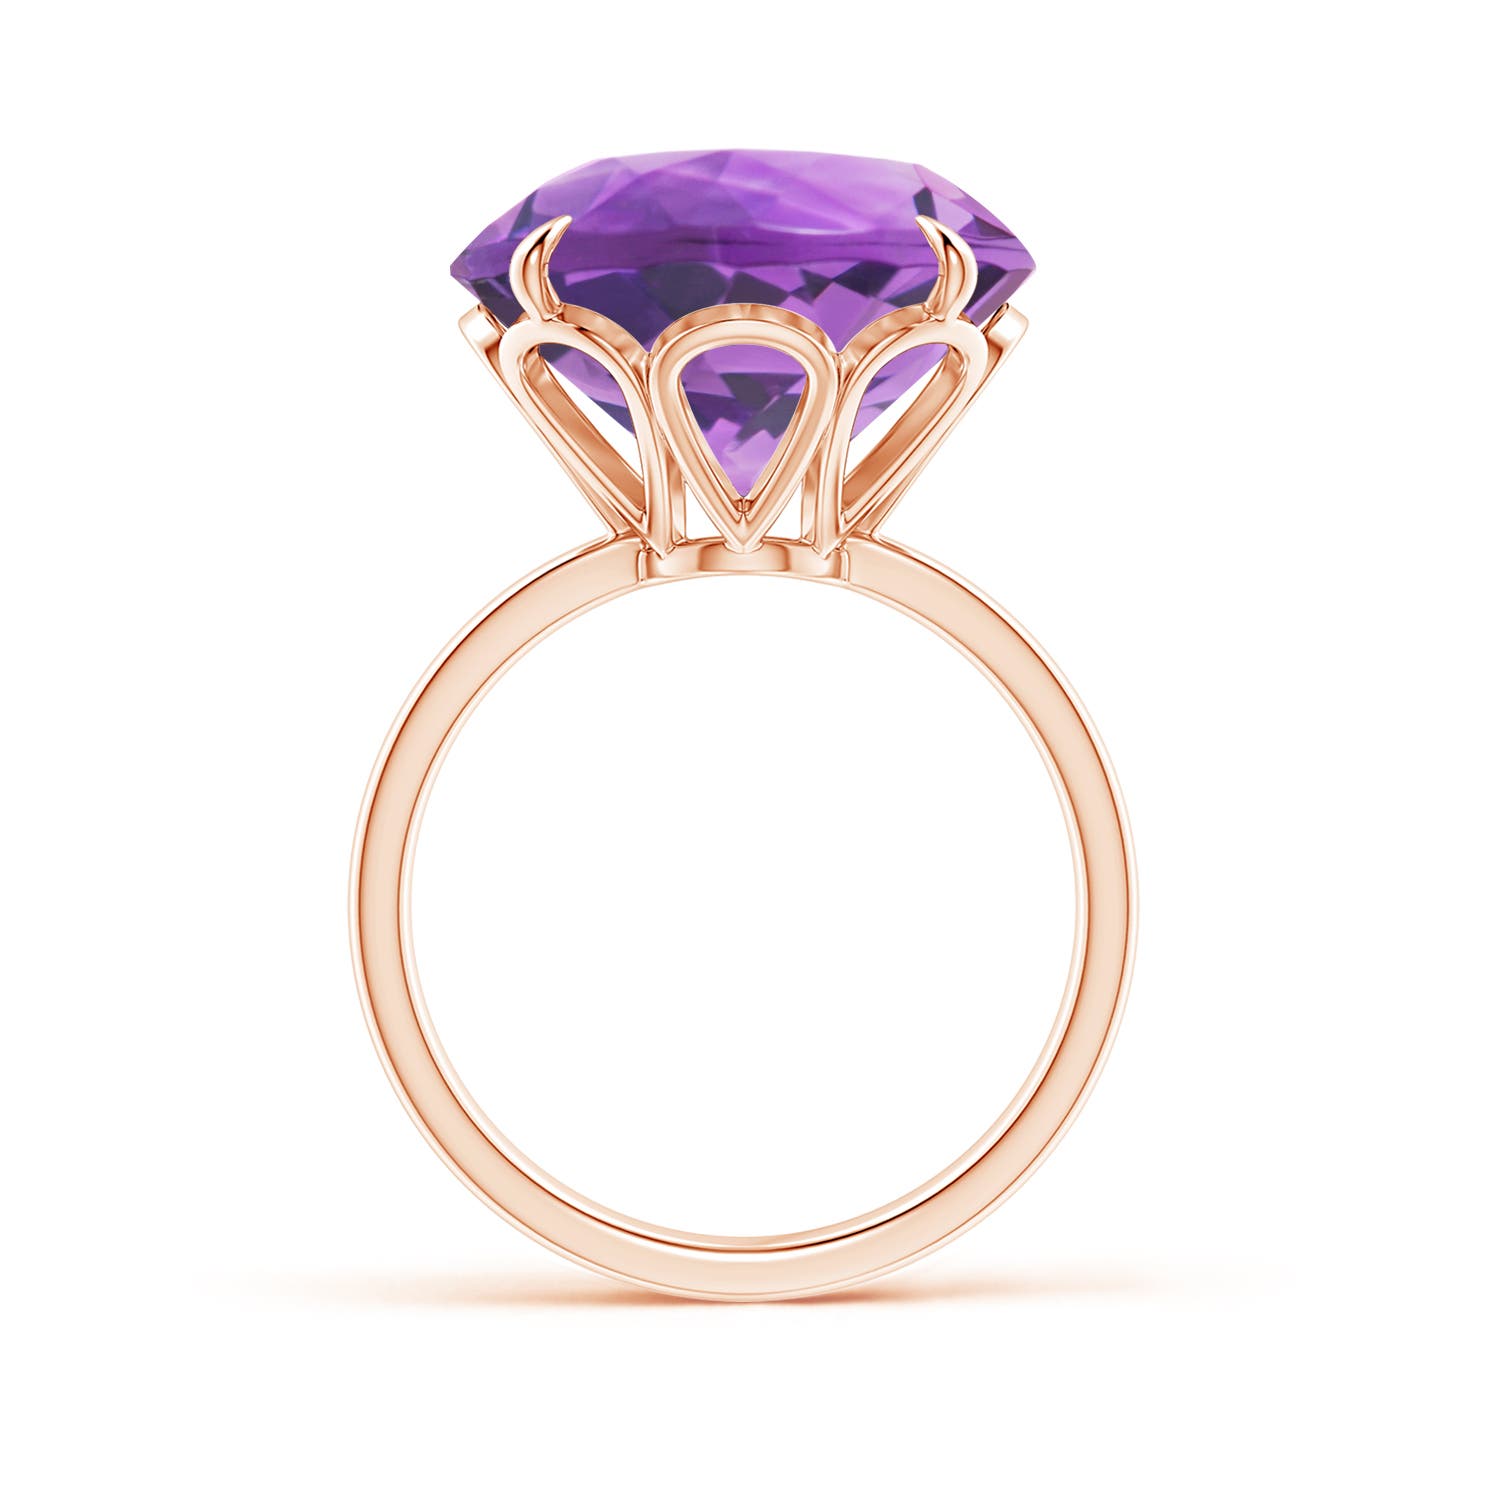 AA- Amethyst / 11 CT / 14 KT Rose Gold